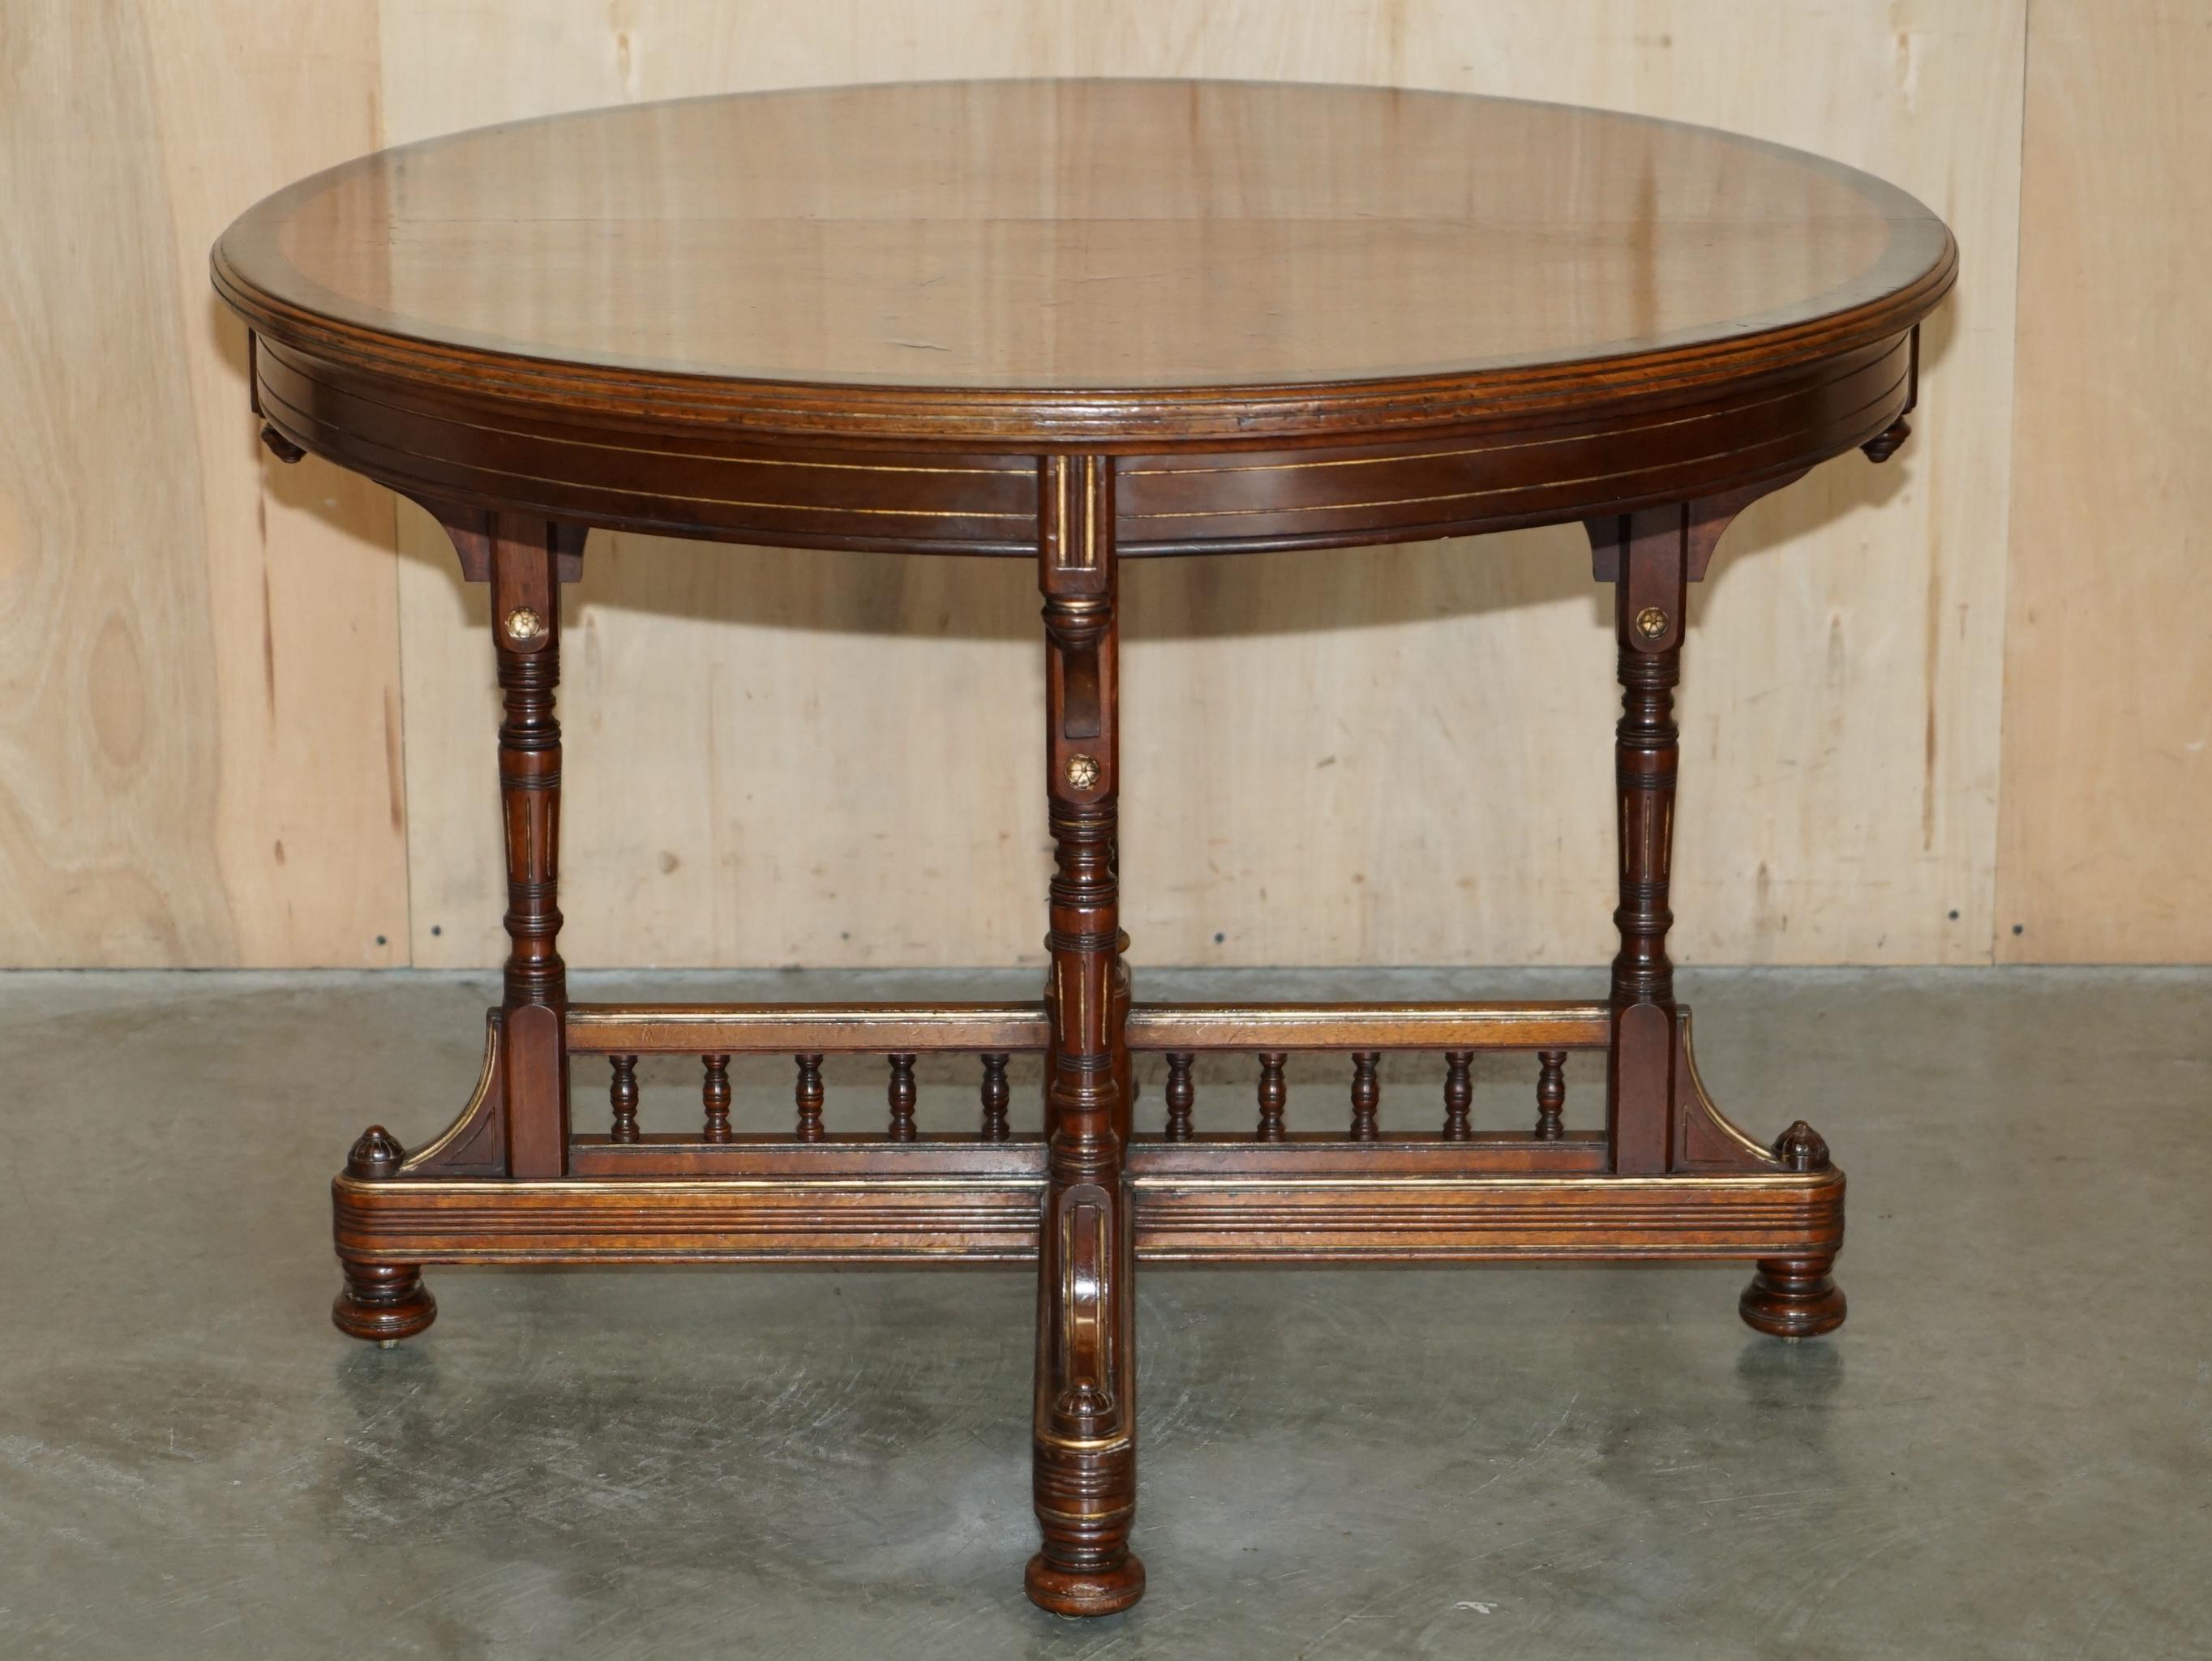 Royal House Antiques

Royal House Antiques is delighted to offer for sale this very rare, fully restored, super quality Gillows of Lancaster & London Amboyna wood & burr walnut ebonised aesthetic movement centre occasional table

Please note the